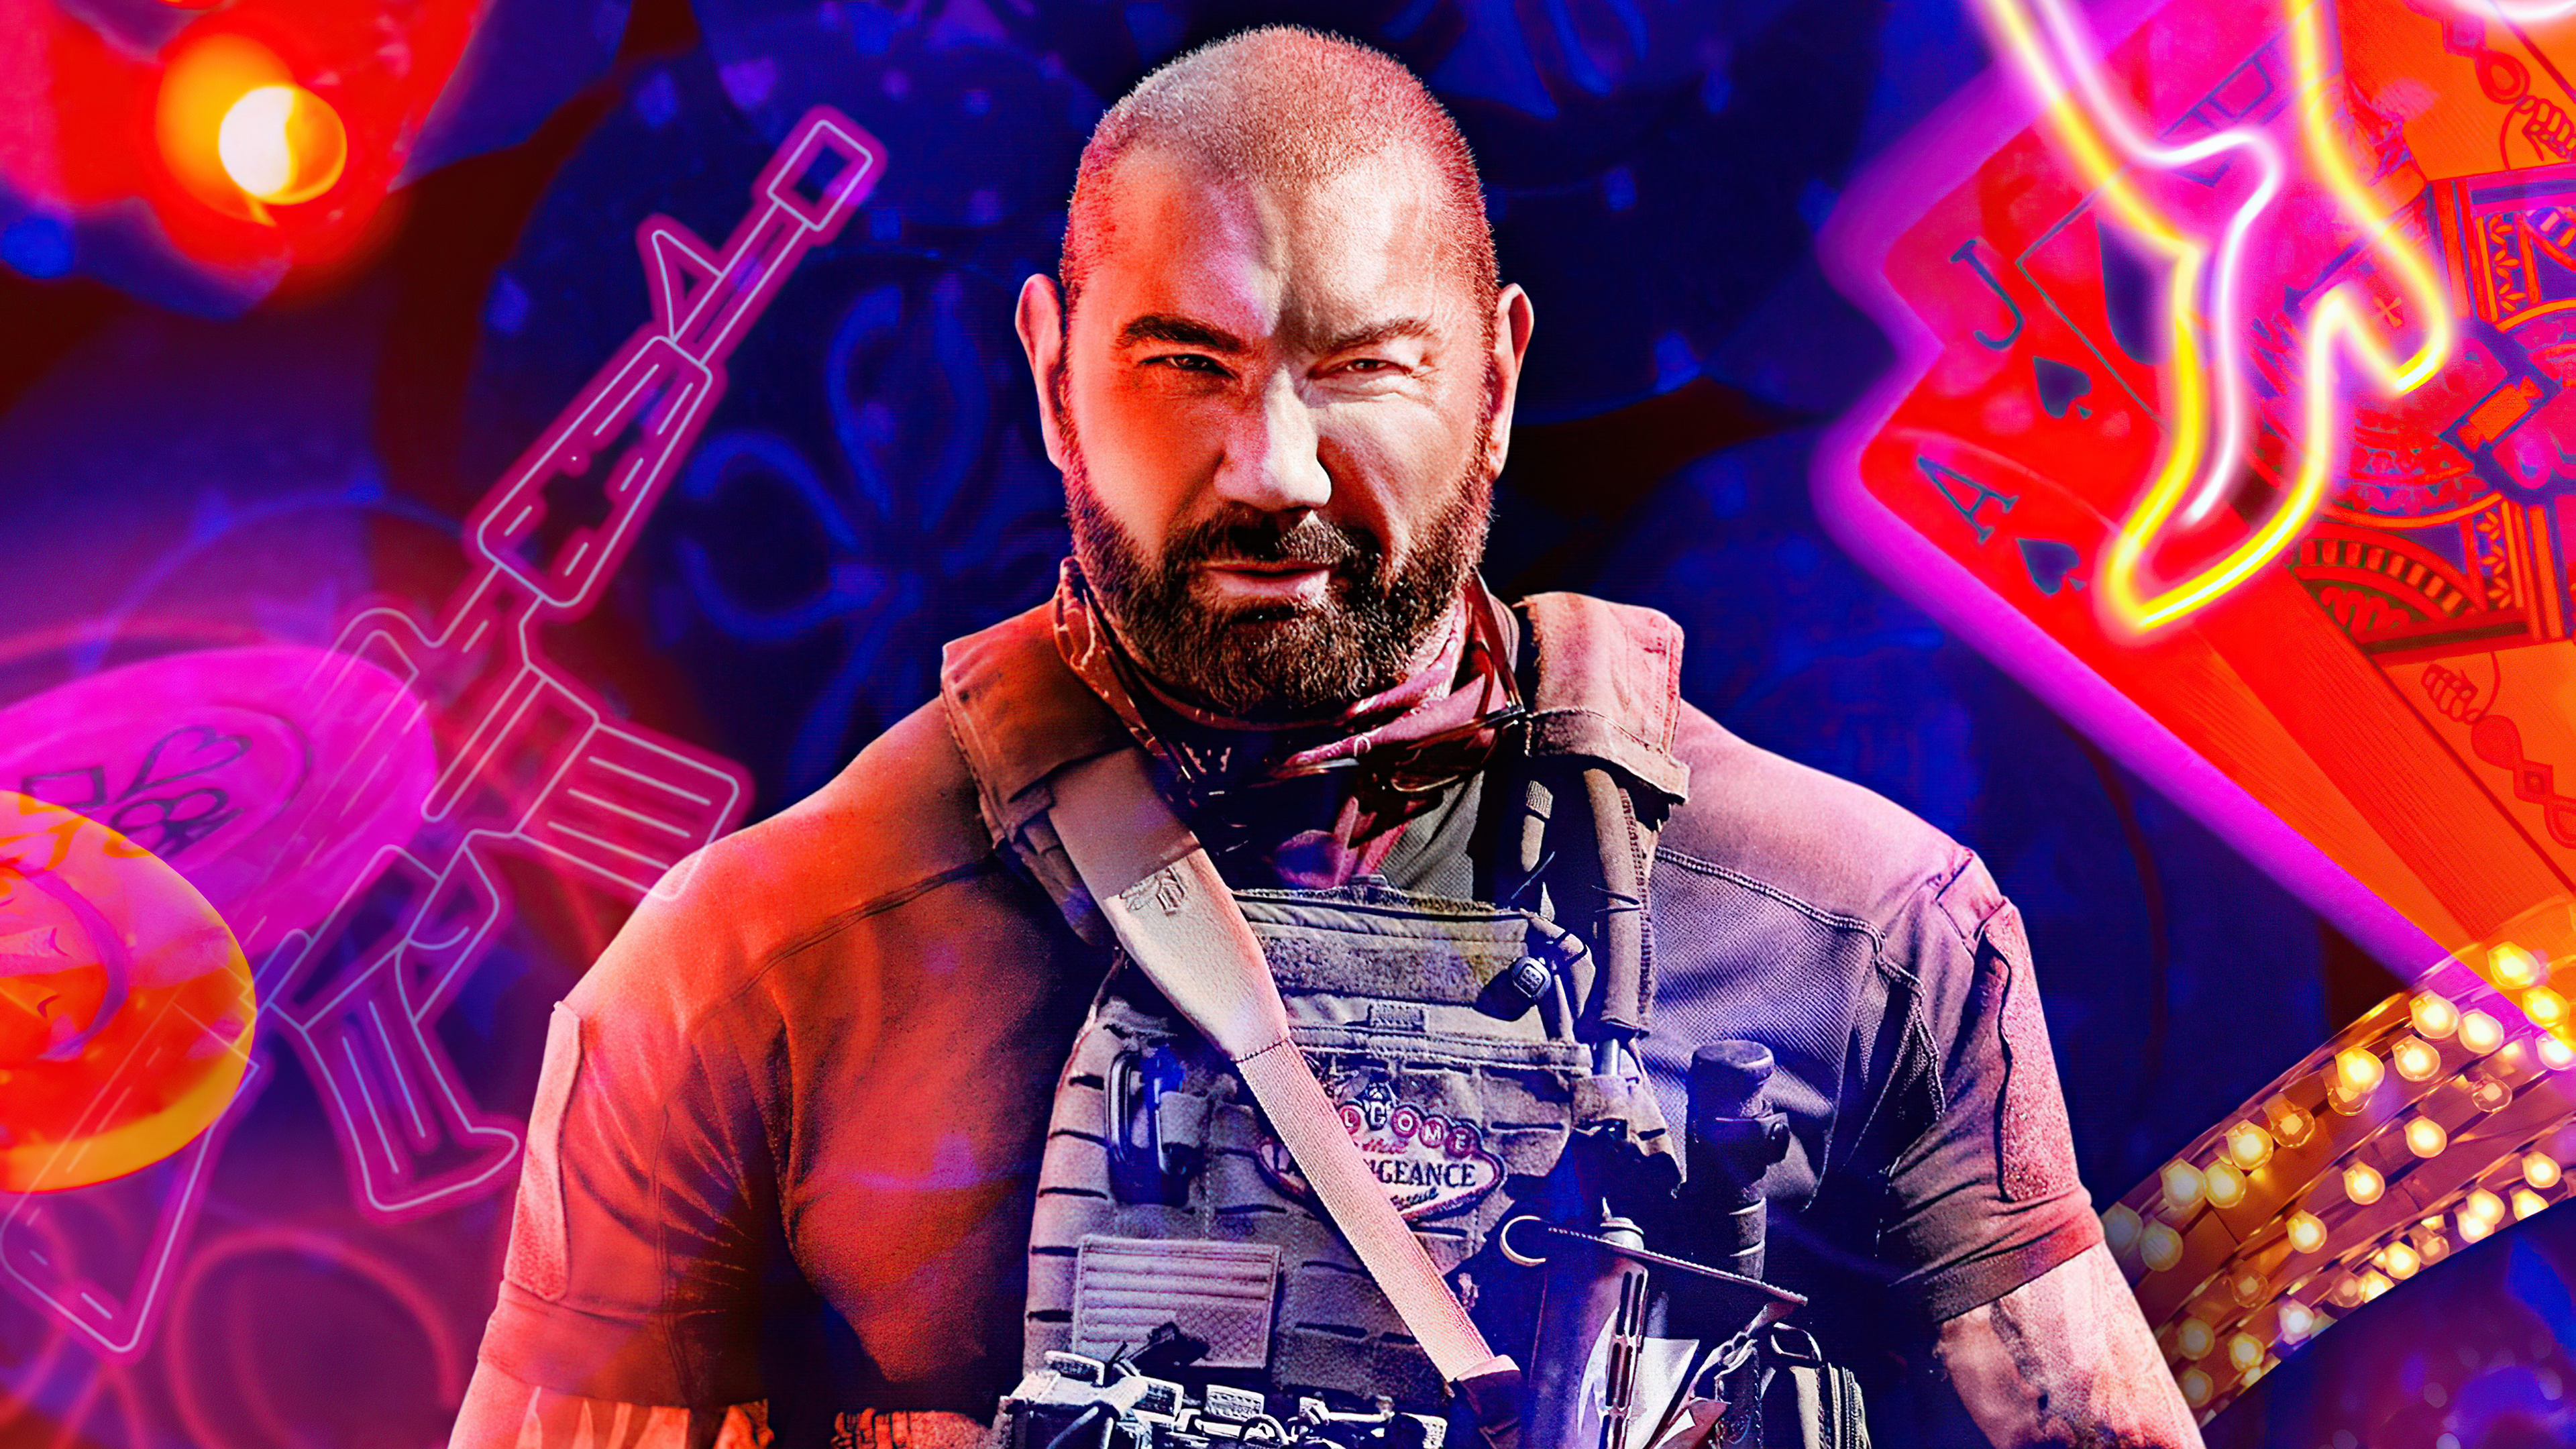 Army of the Dead, Dave Bautista as Scott Ward, Prominent role, Memorable performance, 3840x2160 4K Desktop